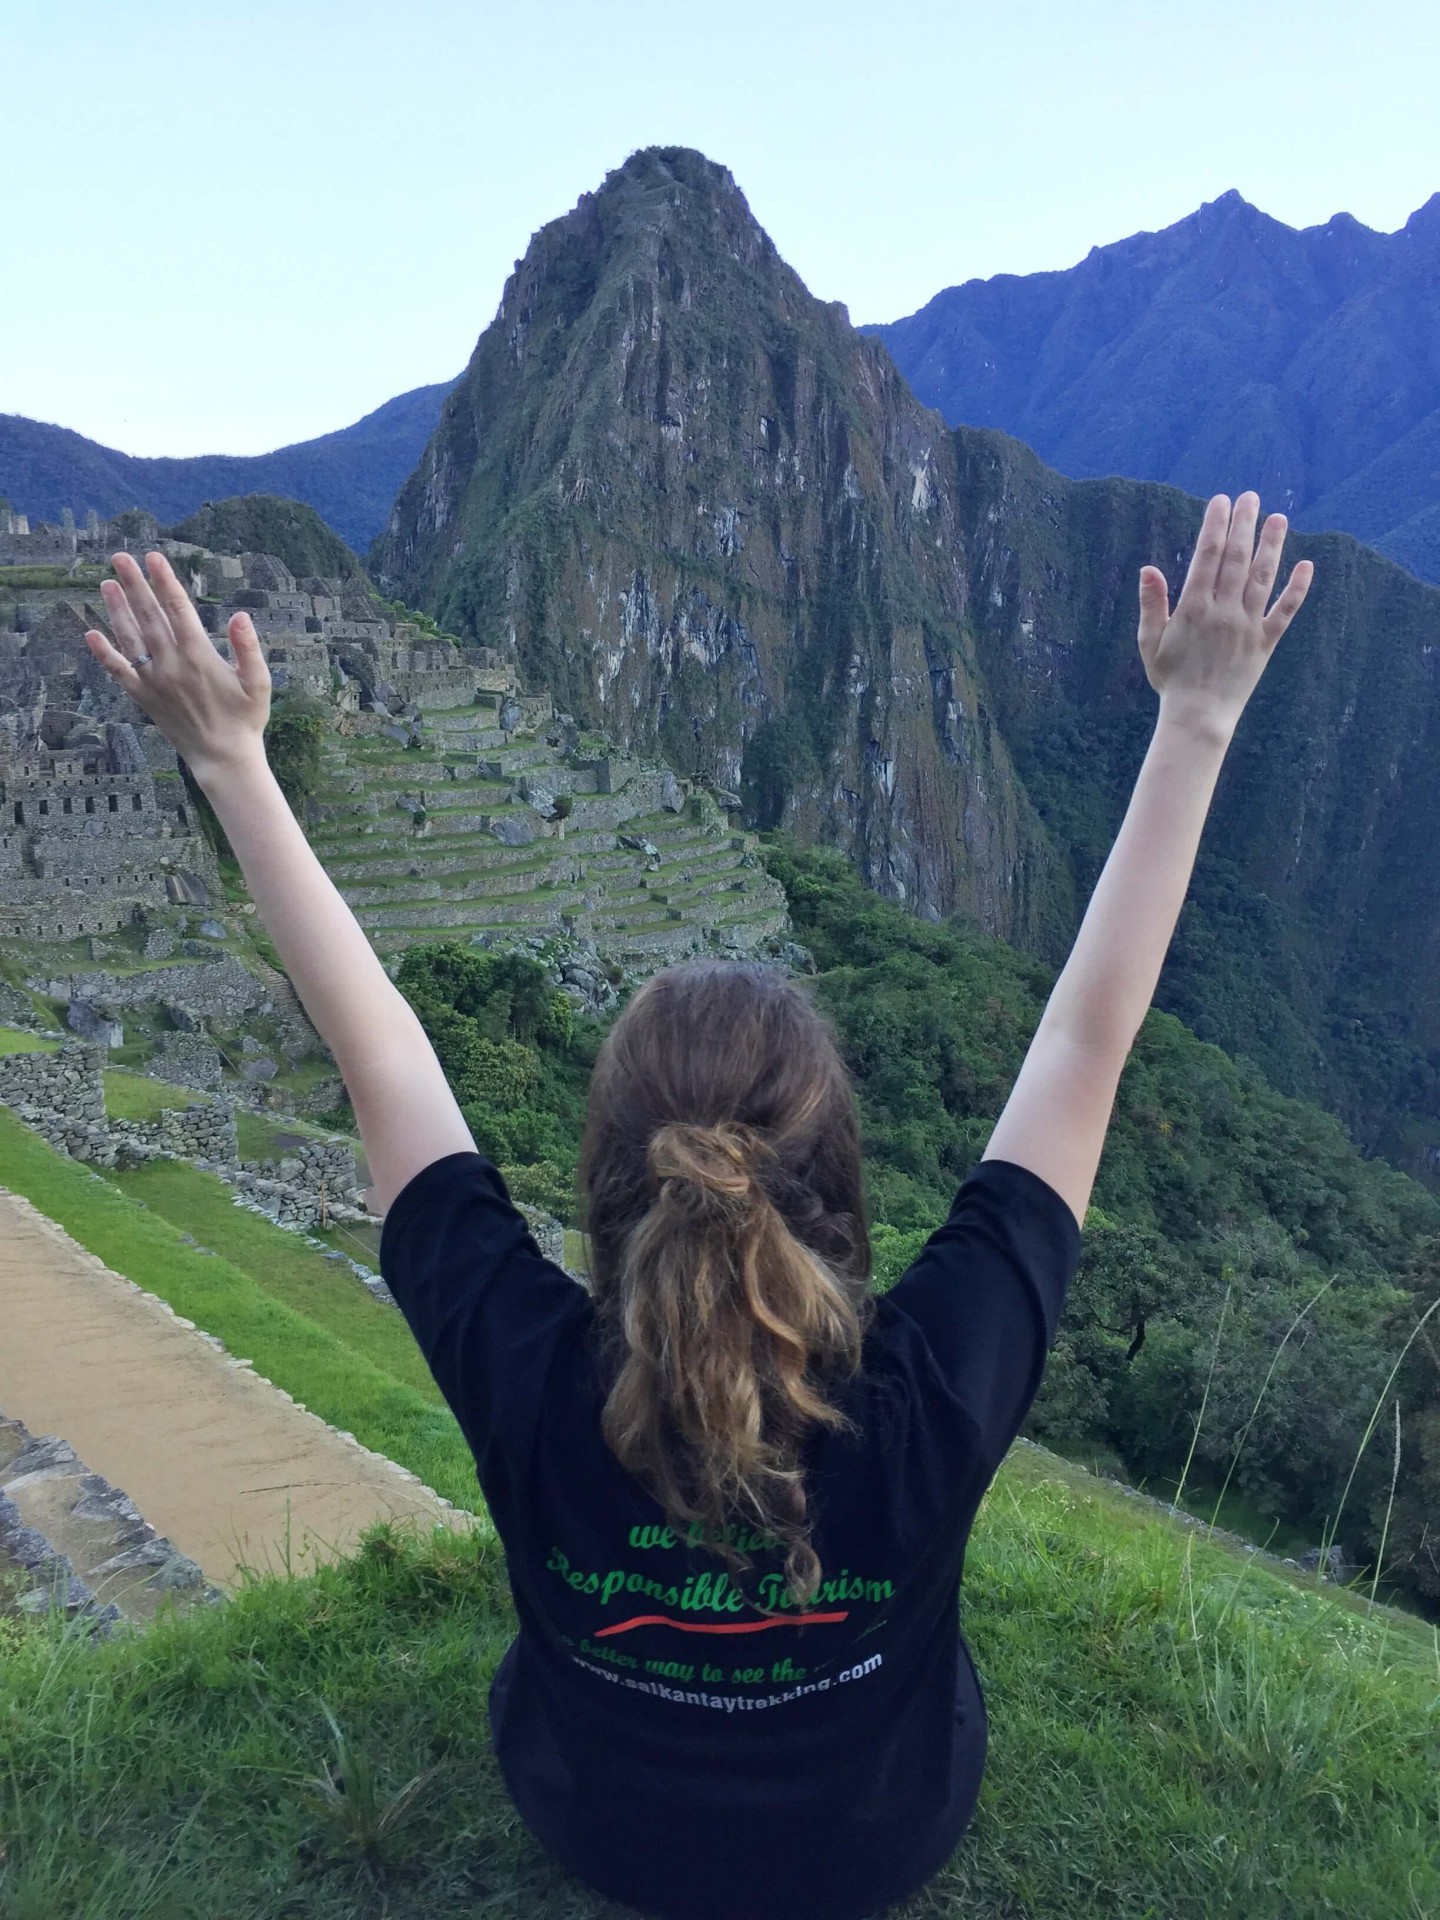 South America Itinerary for 3 weeks travel. This view at the top of Machu Picchu makes all the trekking worth it!